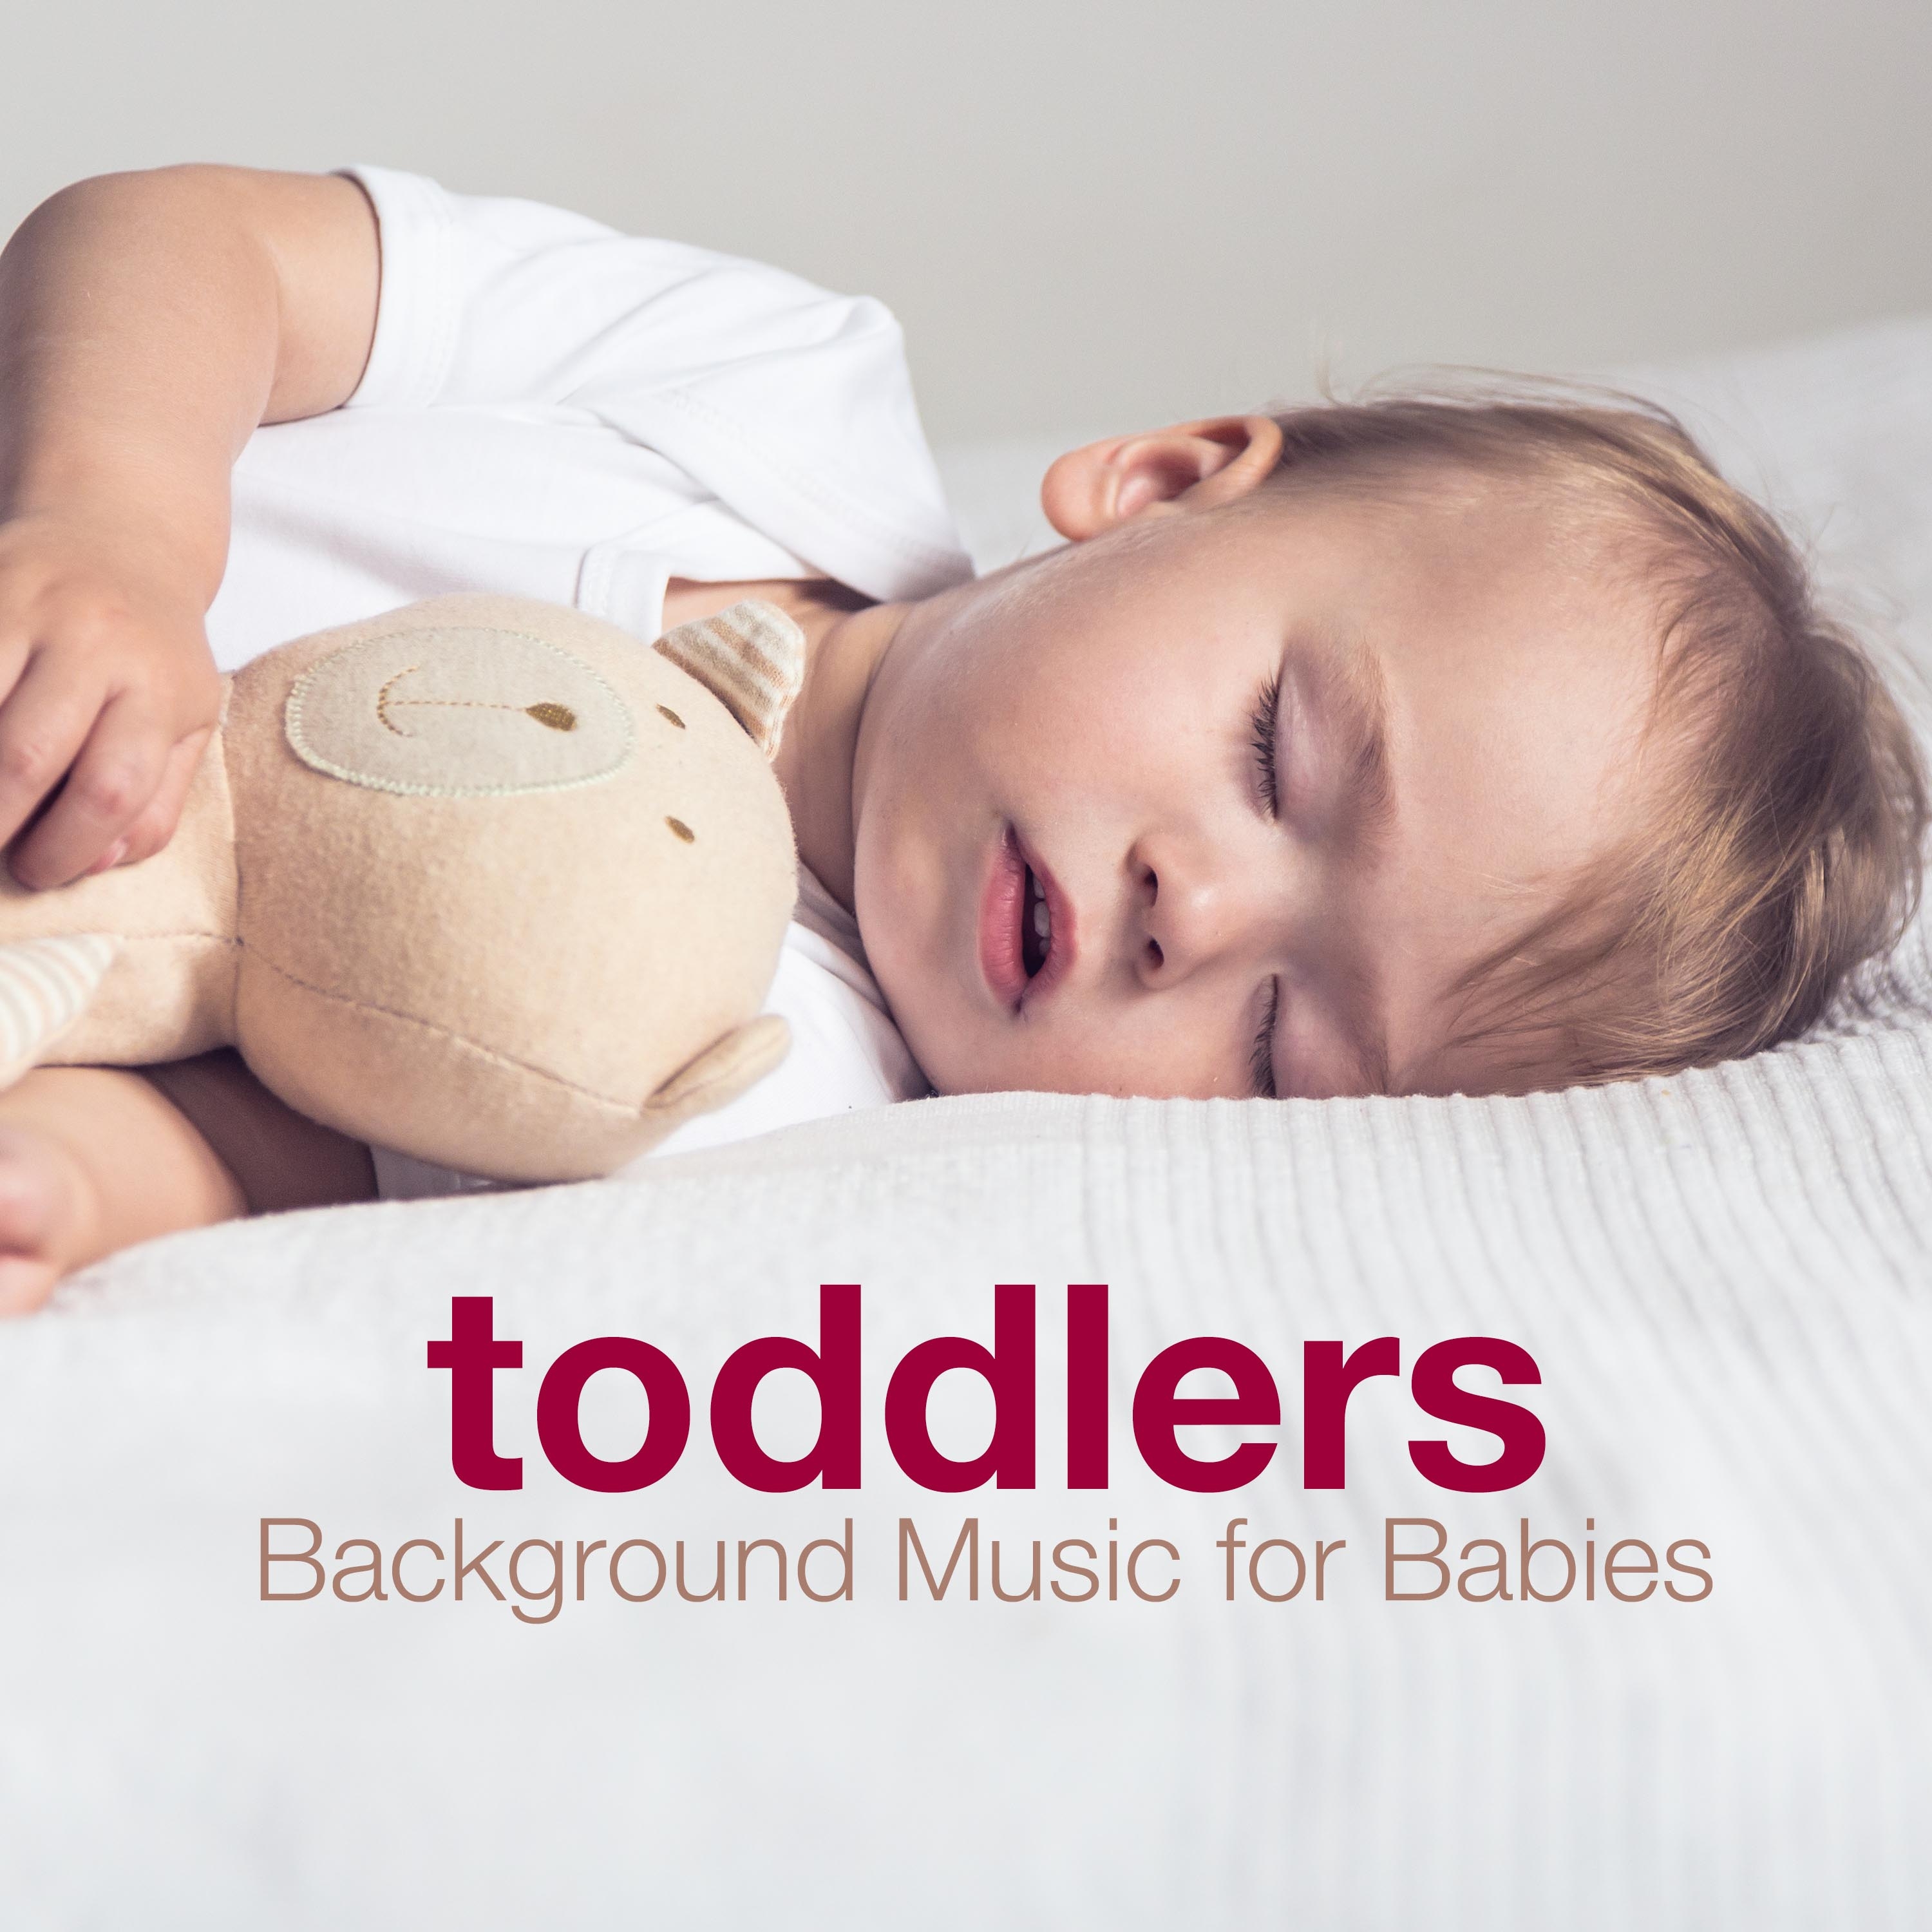 Toddlers - Background Music for Babies, Newborns and Children, Calming Music with Nature Sounds